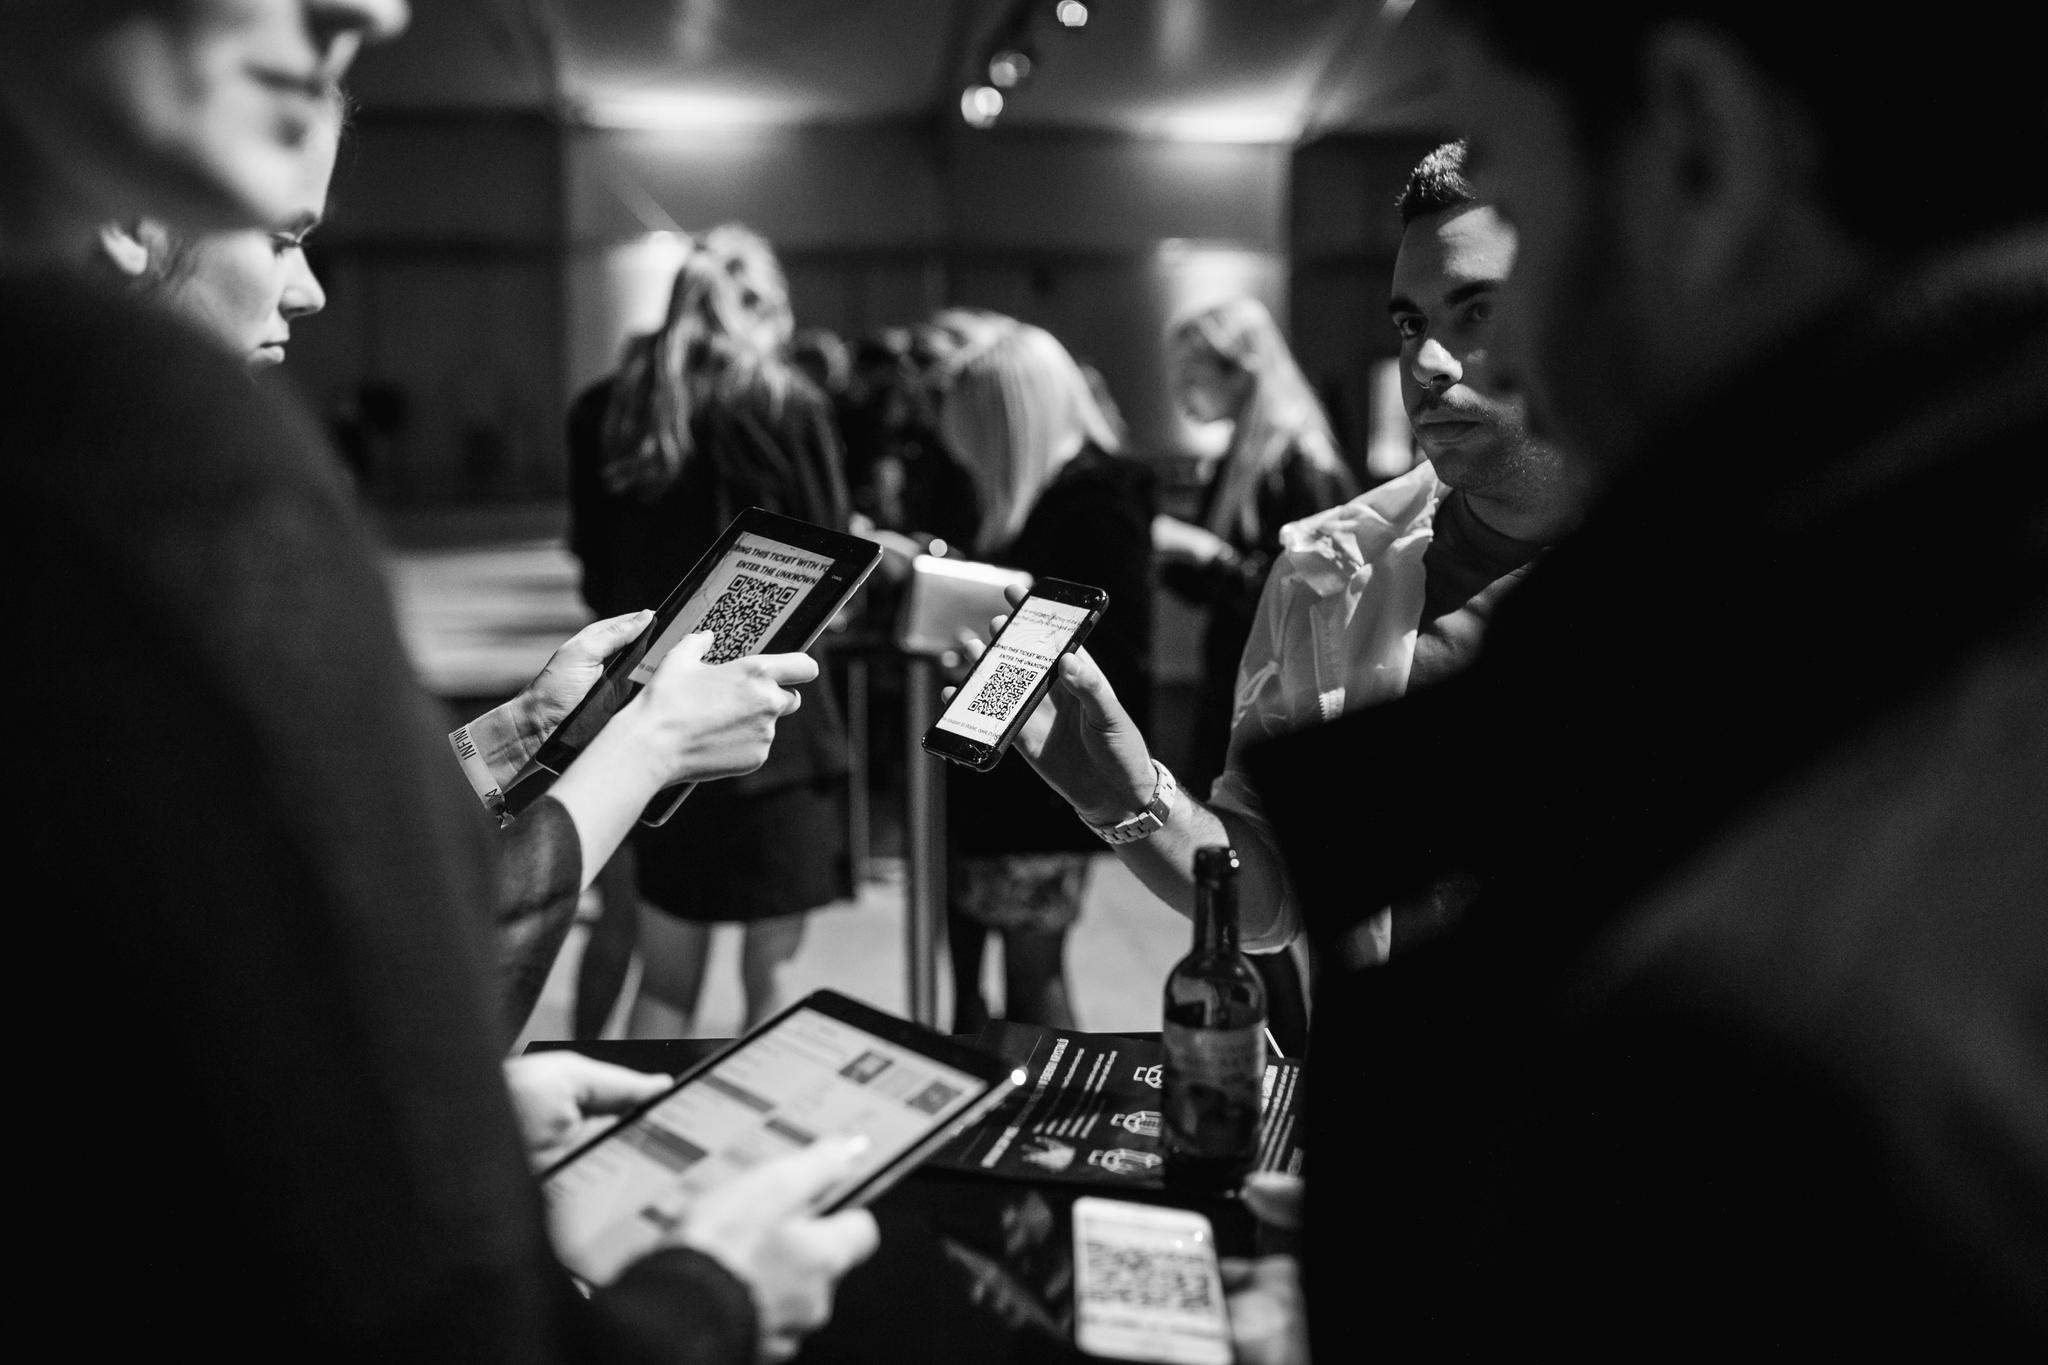 Two out of focus men frame the image left and right. The one on the left holds an ipad. A woman behind him holds another ipad with a large QR code on it. A man behind the man on the right holds out his phone to the woman; the phone also has a QR code on it. A group of women in business clothes queue in the background.